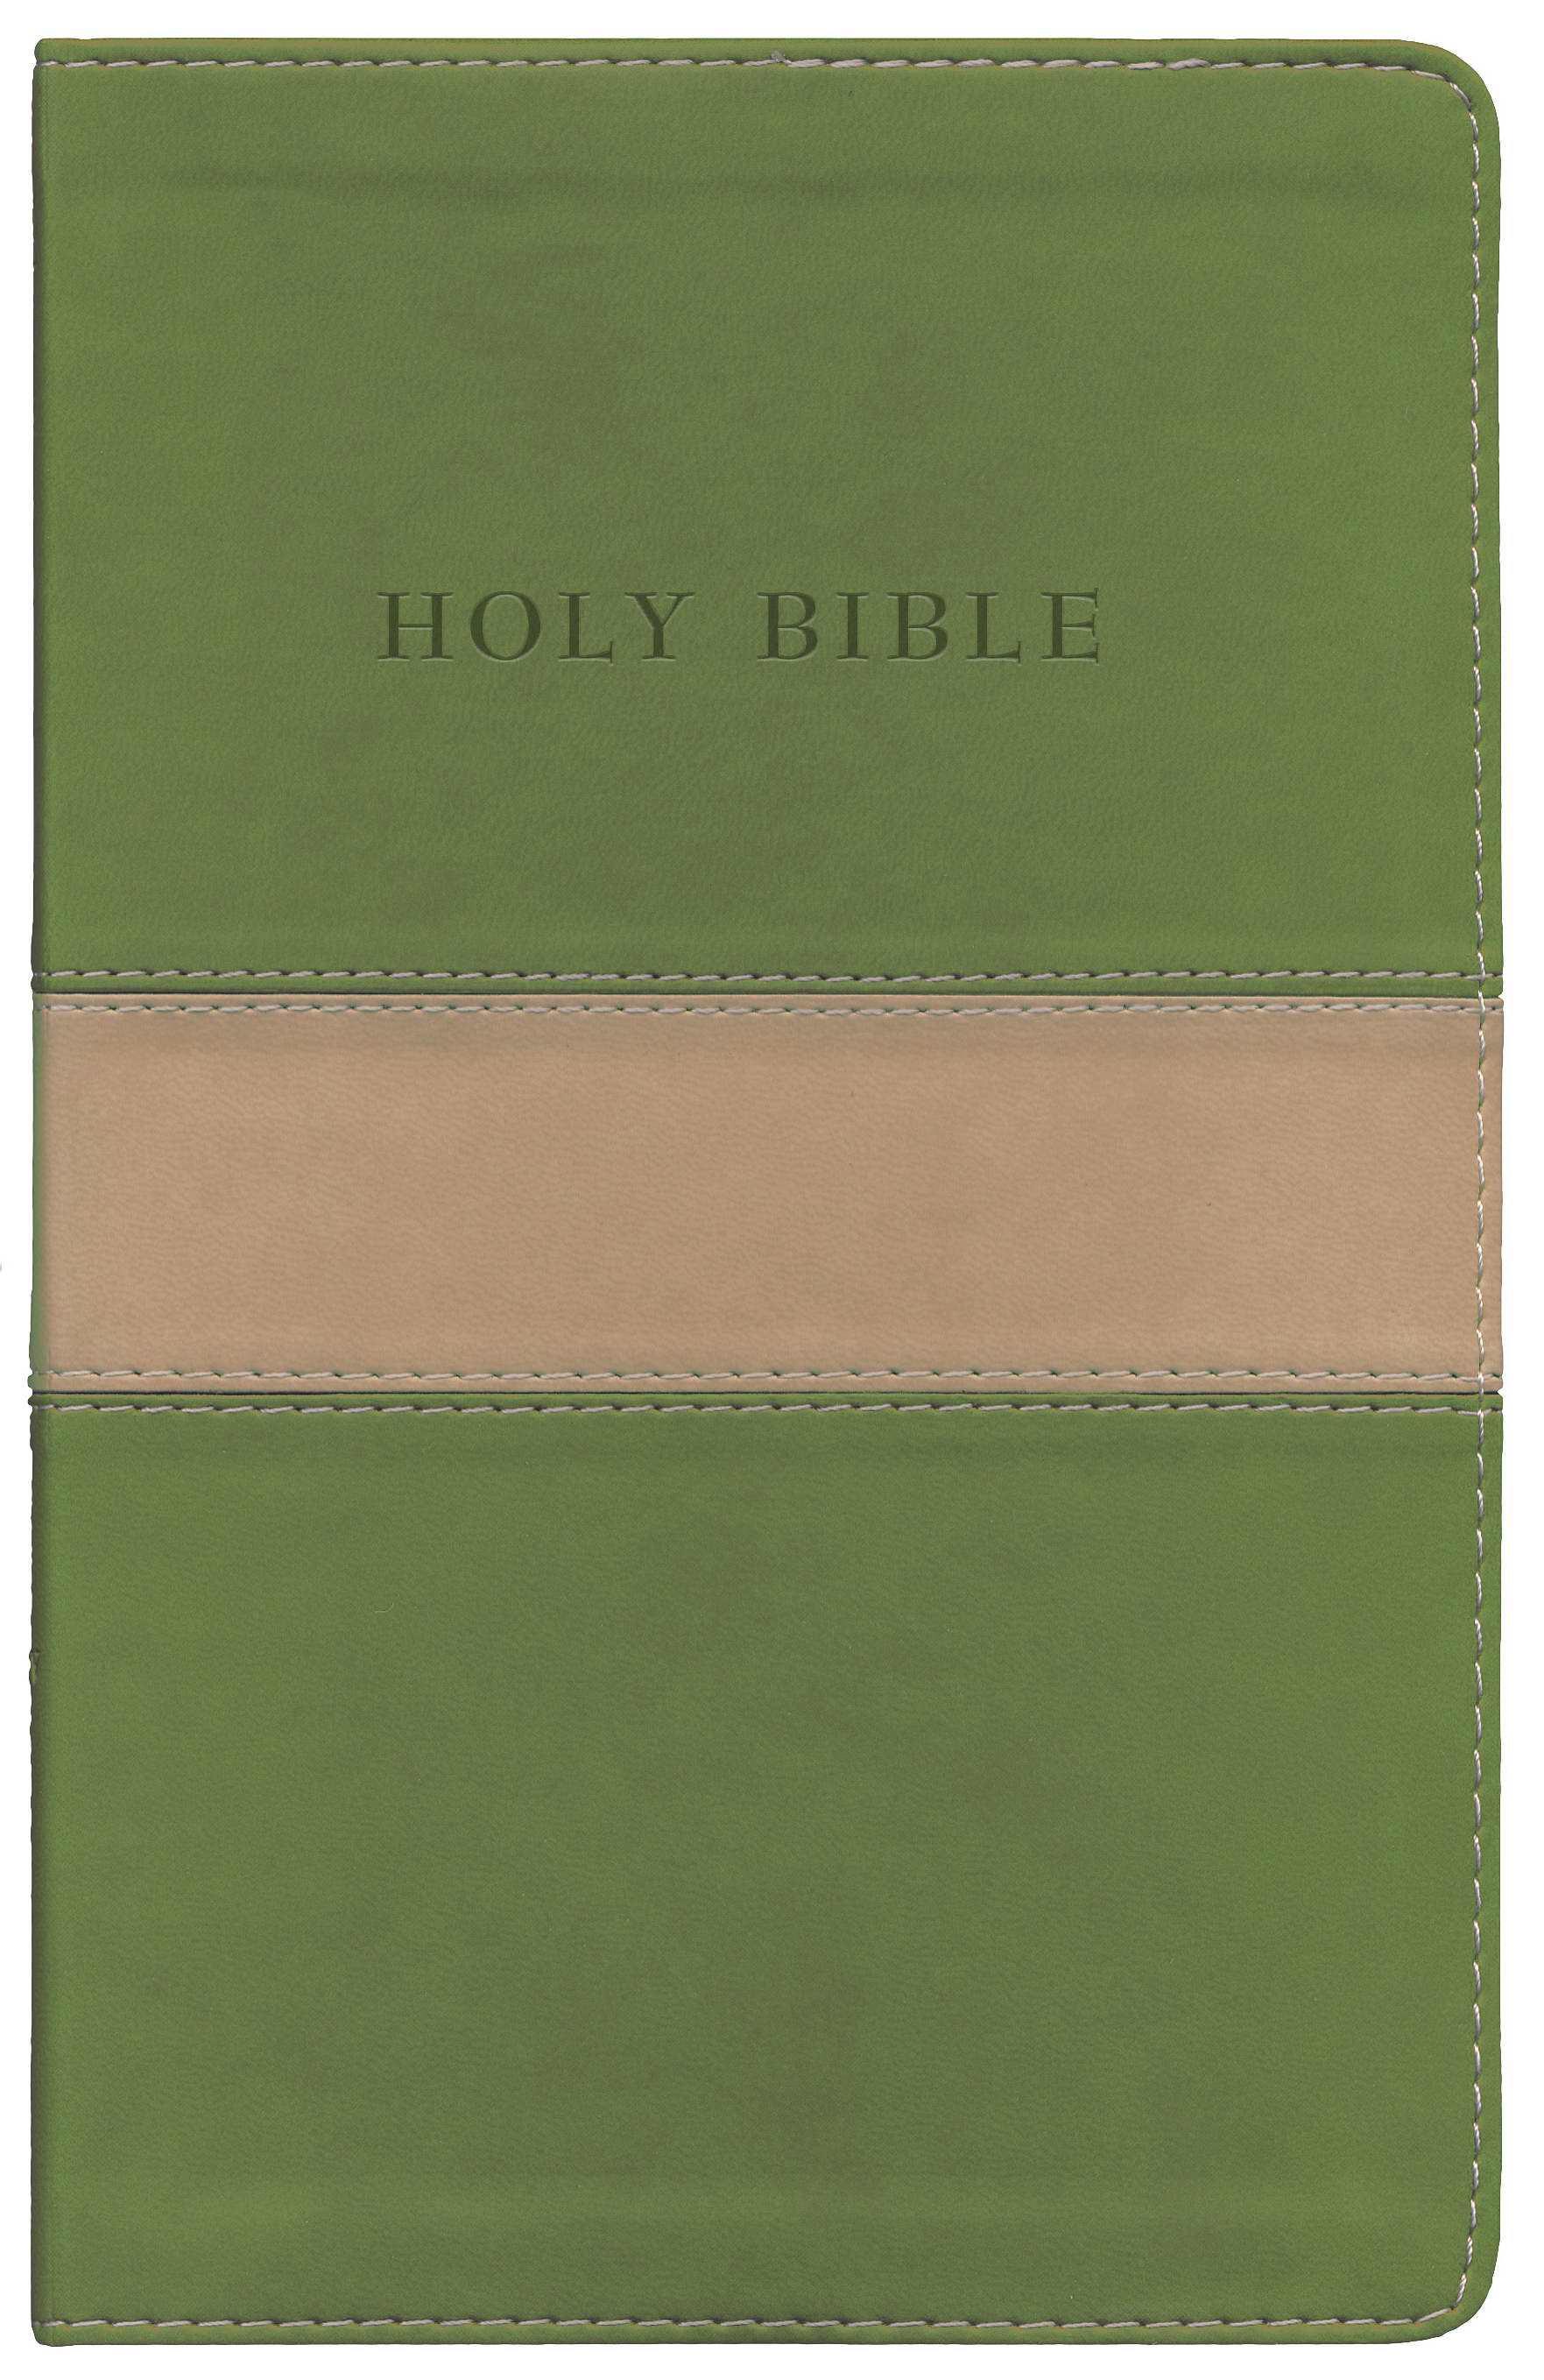 Image of KJV Giant Print Bible, Olive, Tan, Imitiation Leather, Personal Size, Reference, Red Letter, Concordance, Maps, Gilt Edged, Ribbon Markers, Presentation Page other